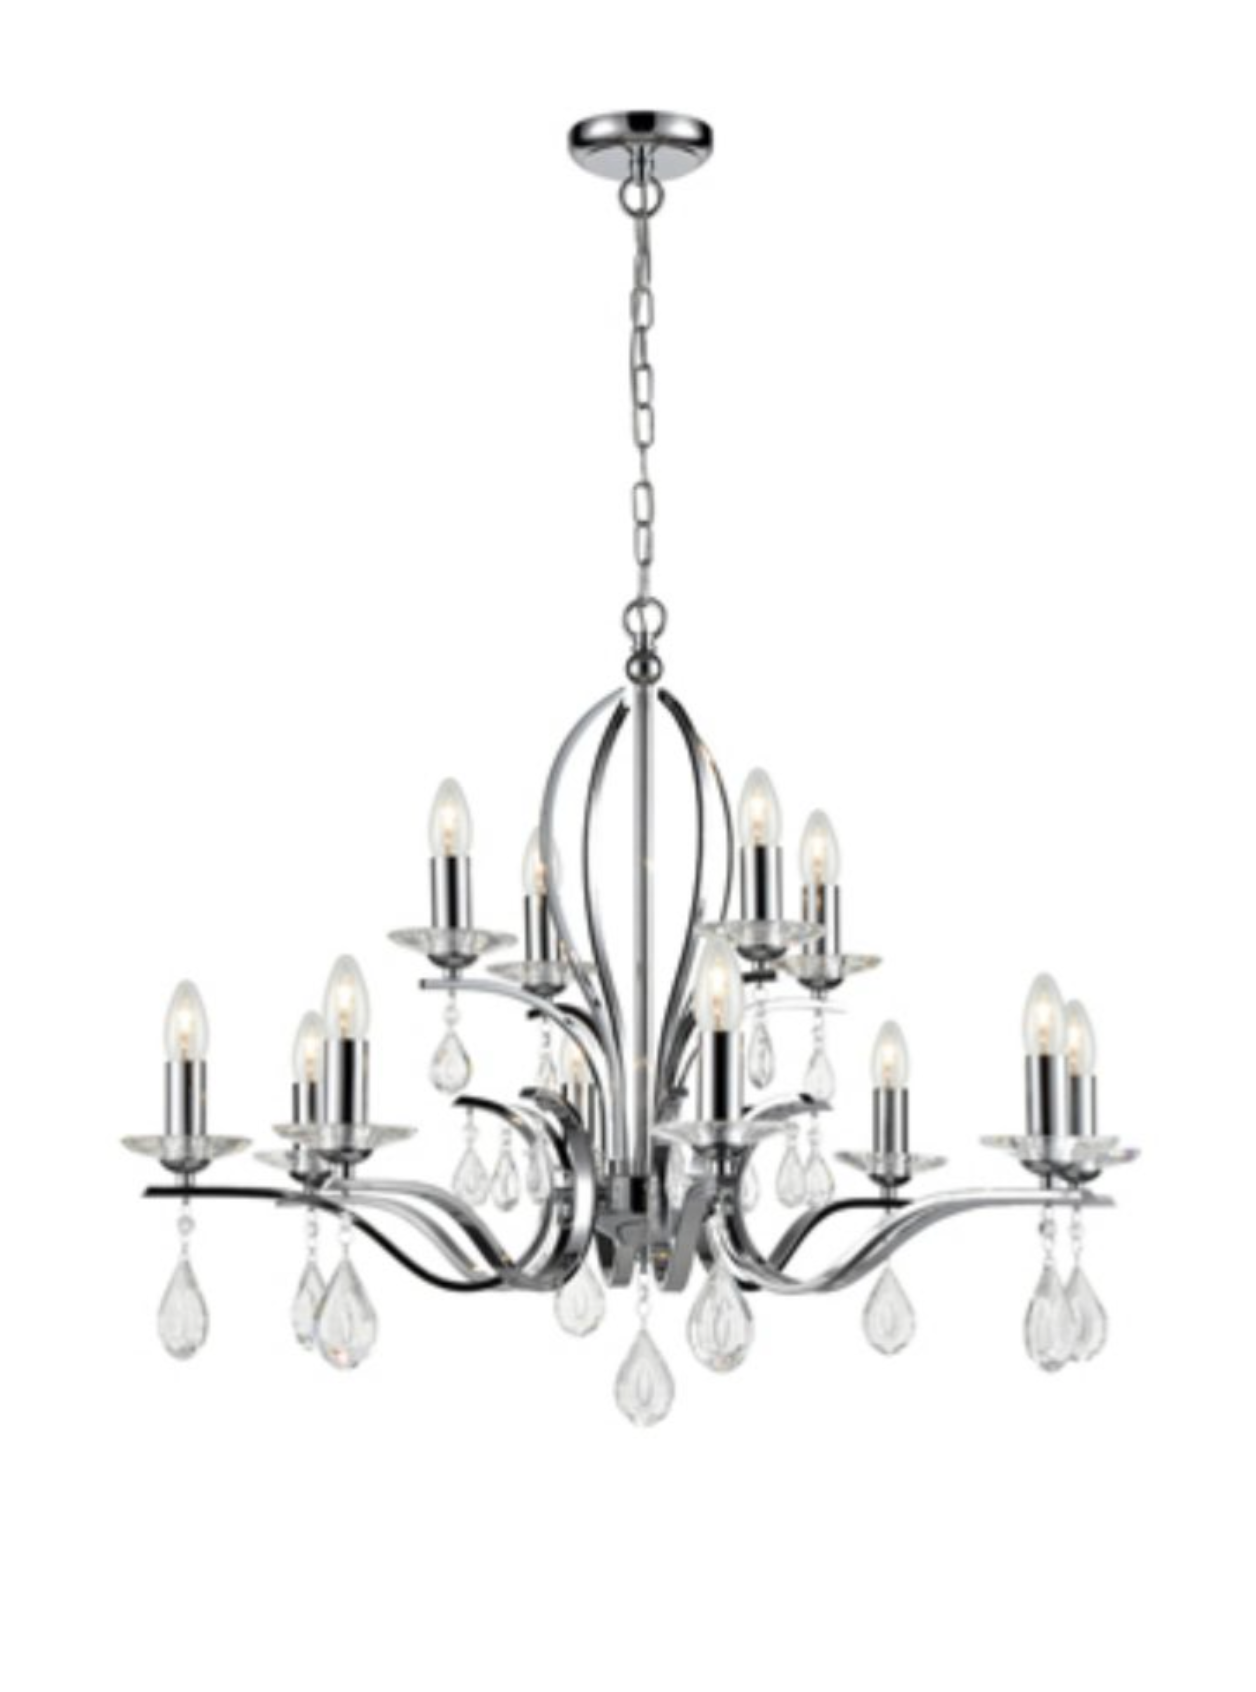 Windsor 12 Arm Chandelier in Chrome - ID 11363